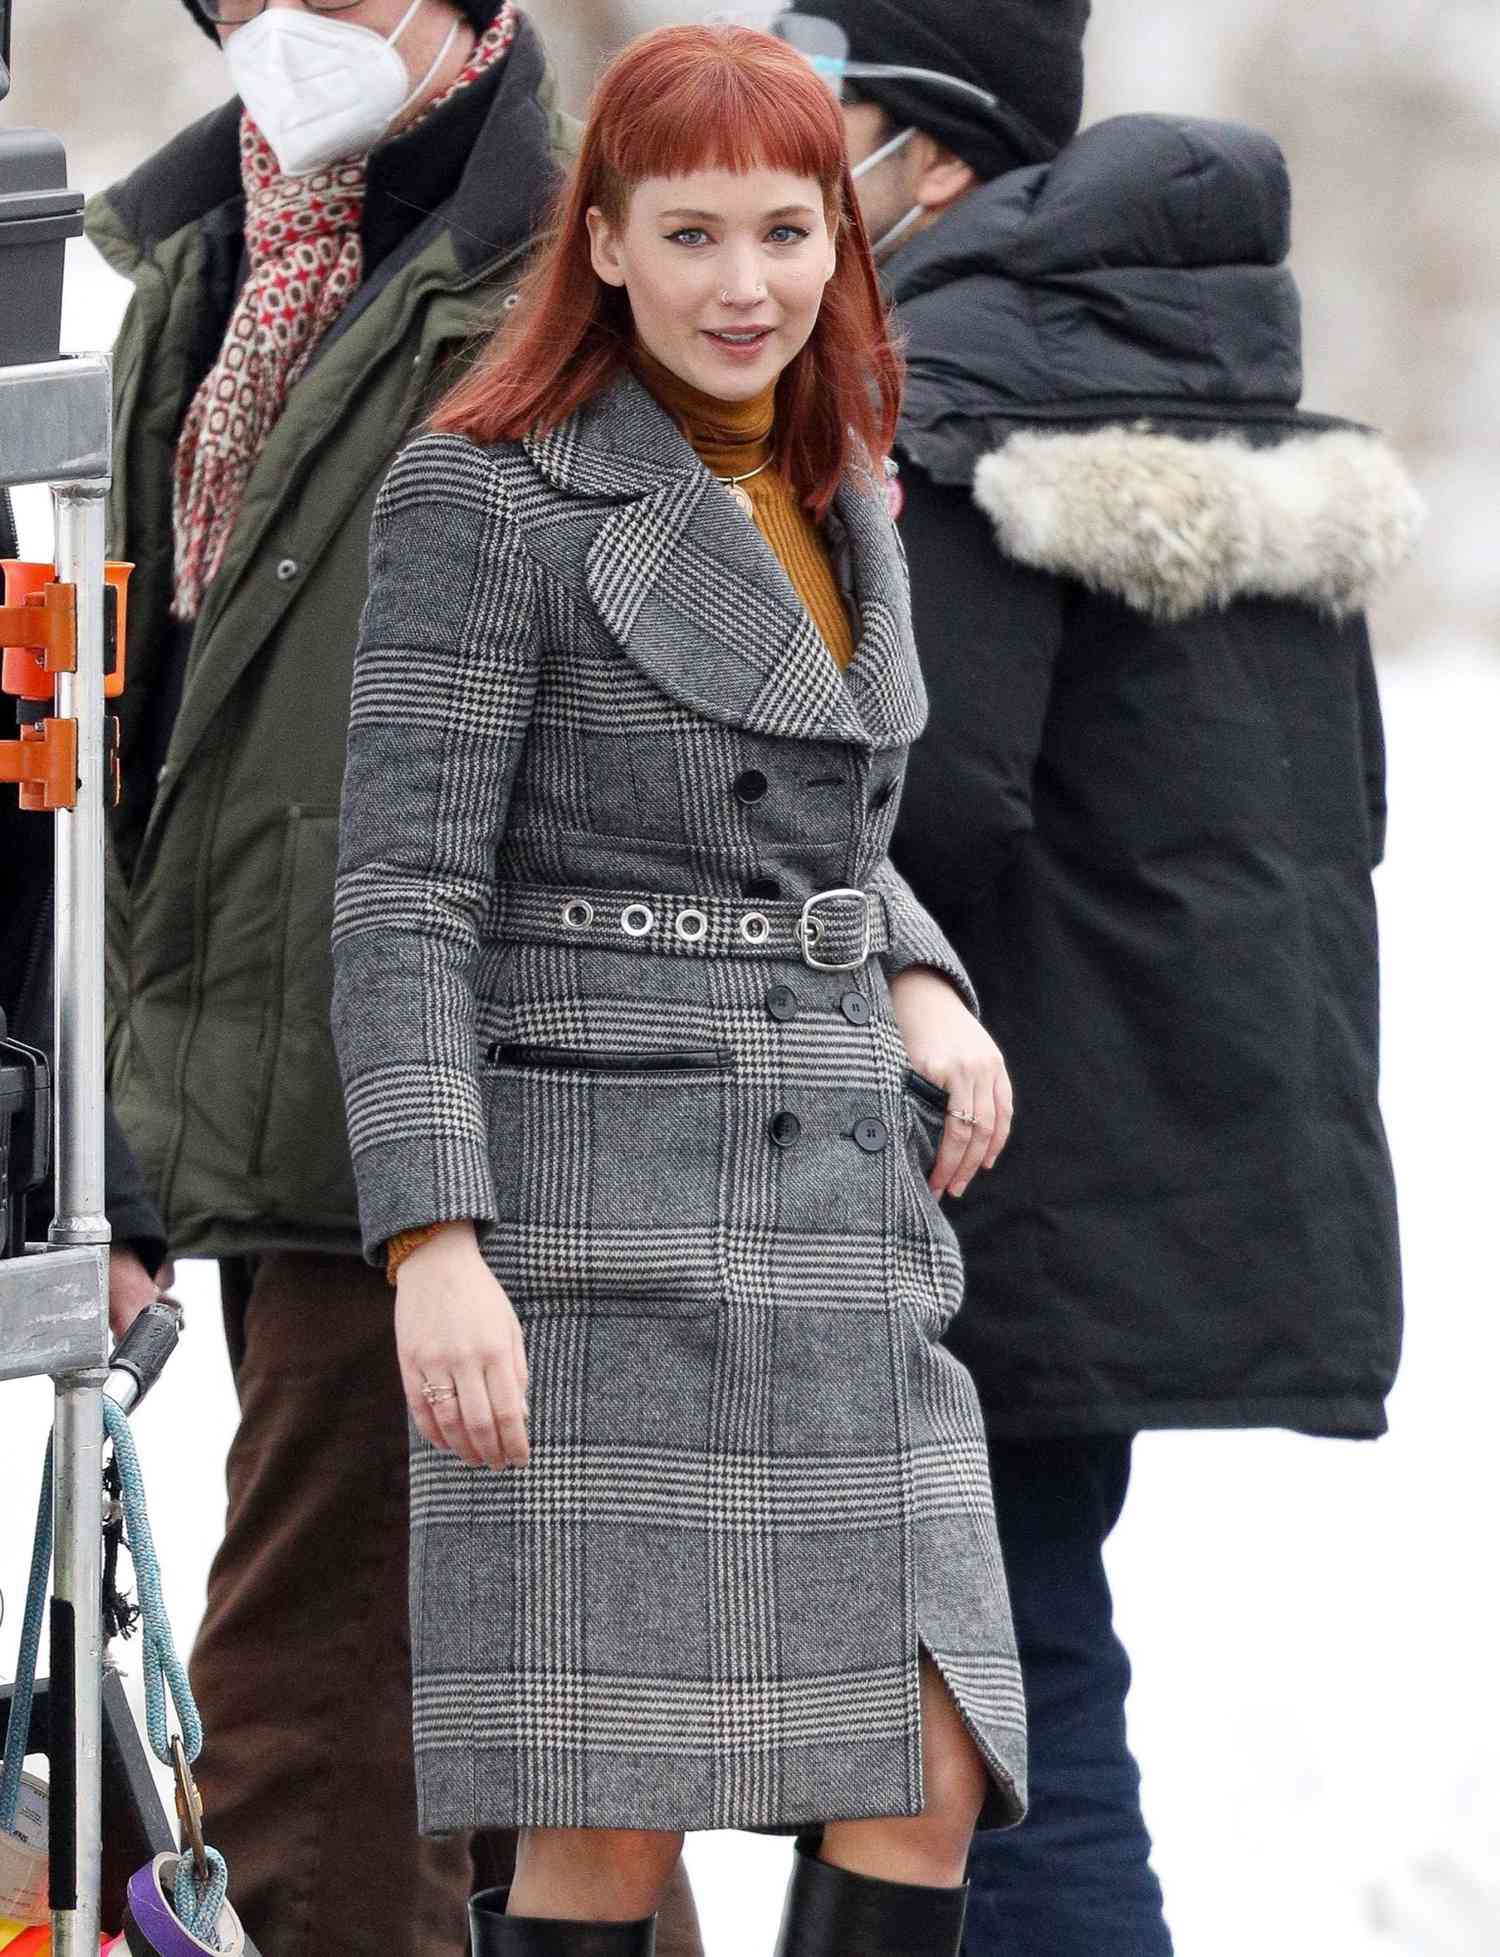 Jennifer Lawrence films in snowy Framingham, MA for "Don't Look Up"